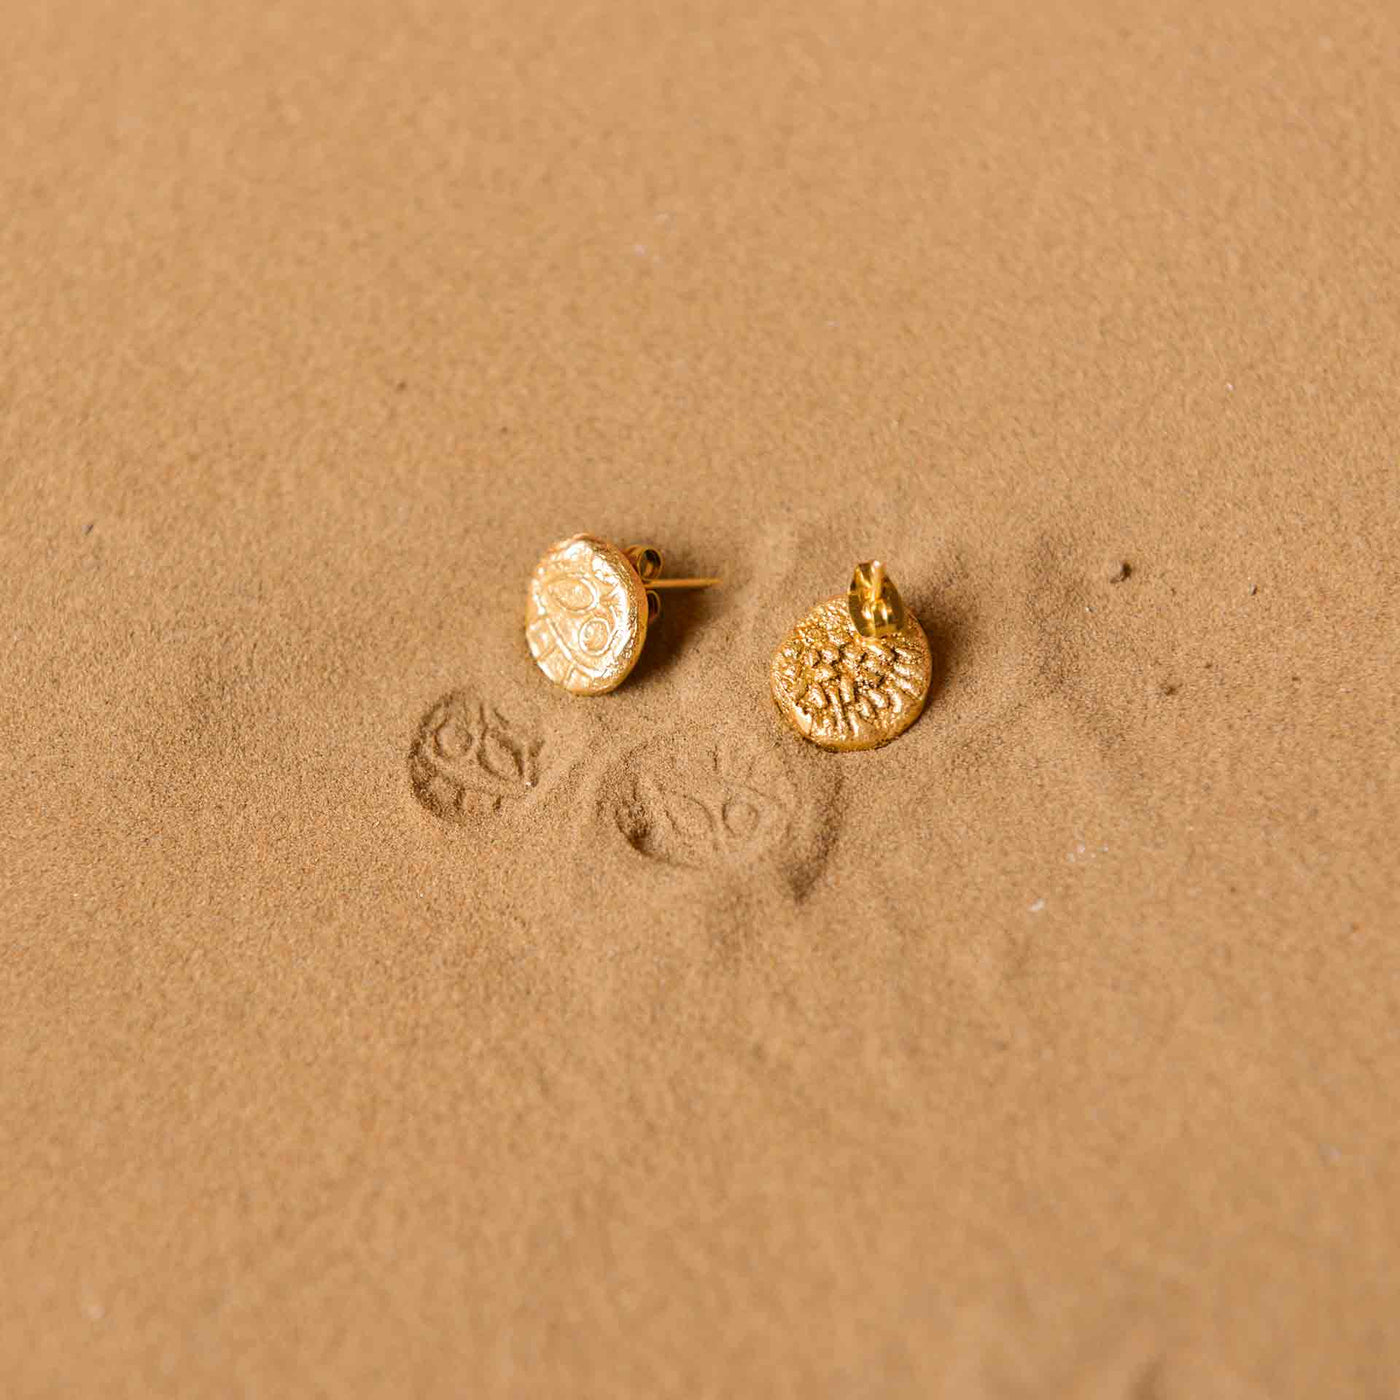 A pair of dye gold studs, which are made to resemble fossils.